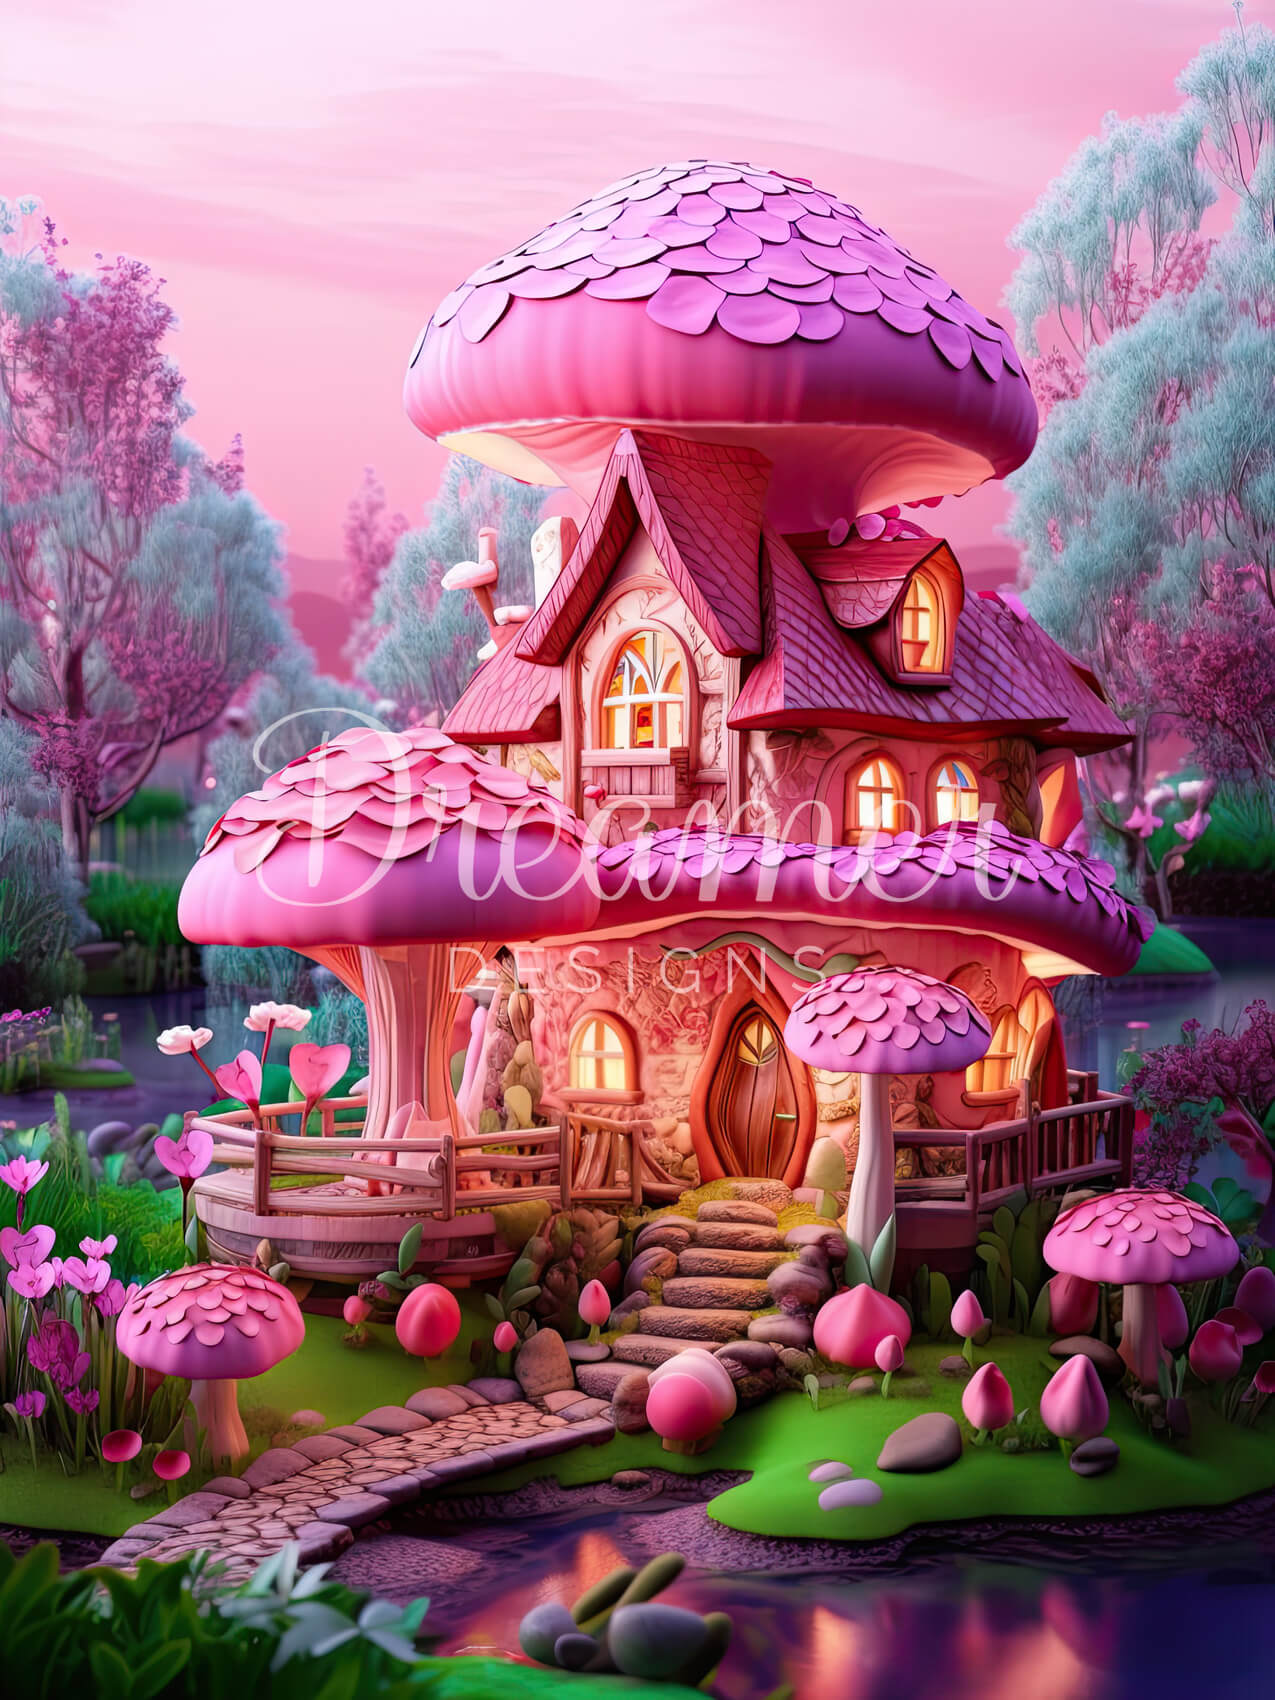 5D Diamond Painting Pink Mushroom House DIY Diamond Painting Kit Picture  Cross Stitch Painting Kit for Home Wall and Entrance Decoration 16x24  Inches 